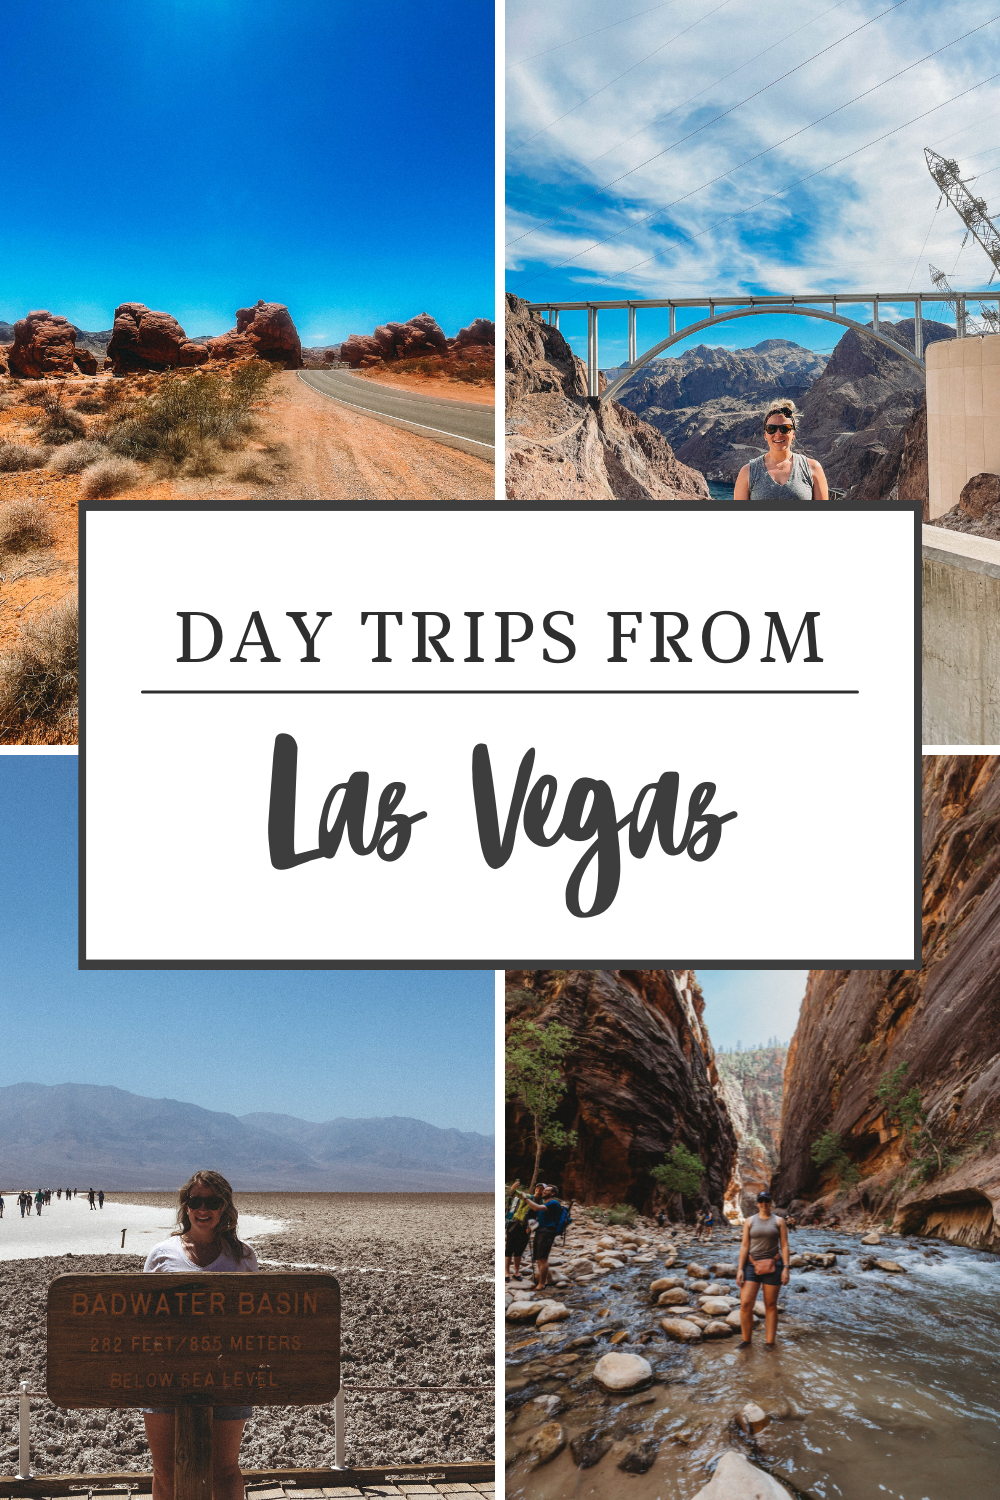 Are you looking to plan some day trips from Vegas? There are so many fun things to do and see just a short drive from Las Vegas. You can even use Vegas as a base to visit some amazing National Parks. #lasvegas #vegasbaby #daytrips #visitlasvegas #nationalparks